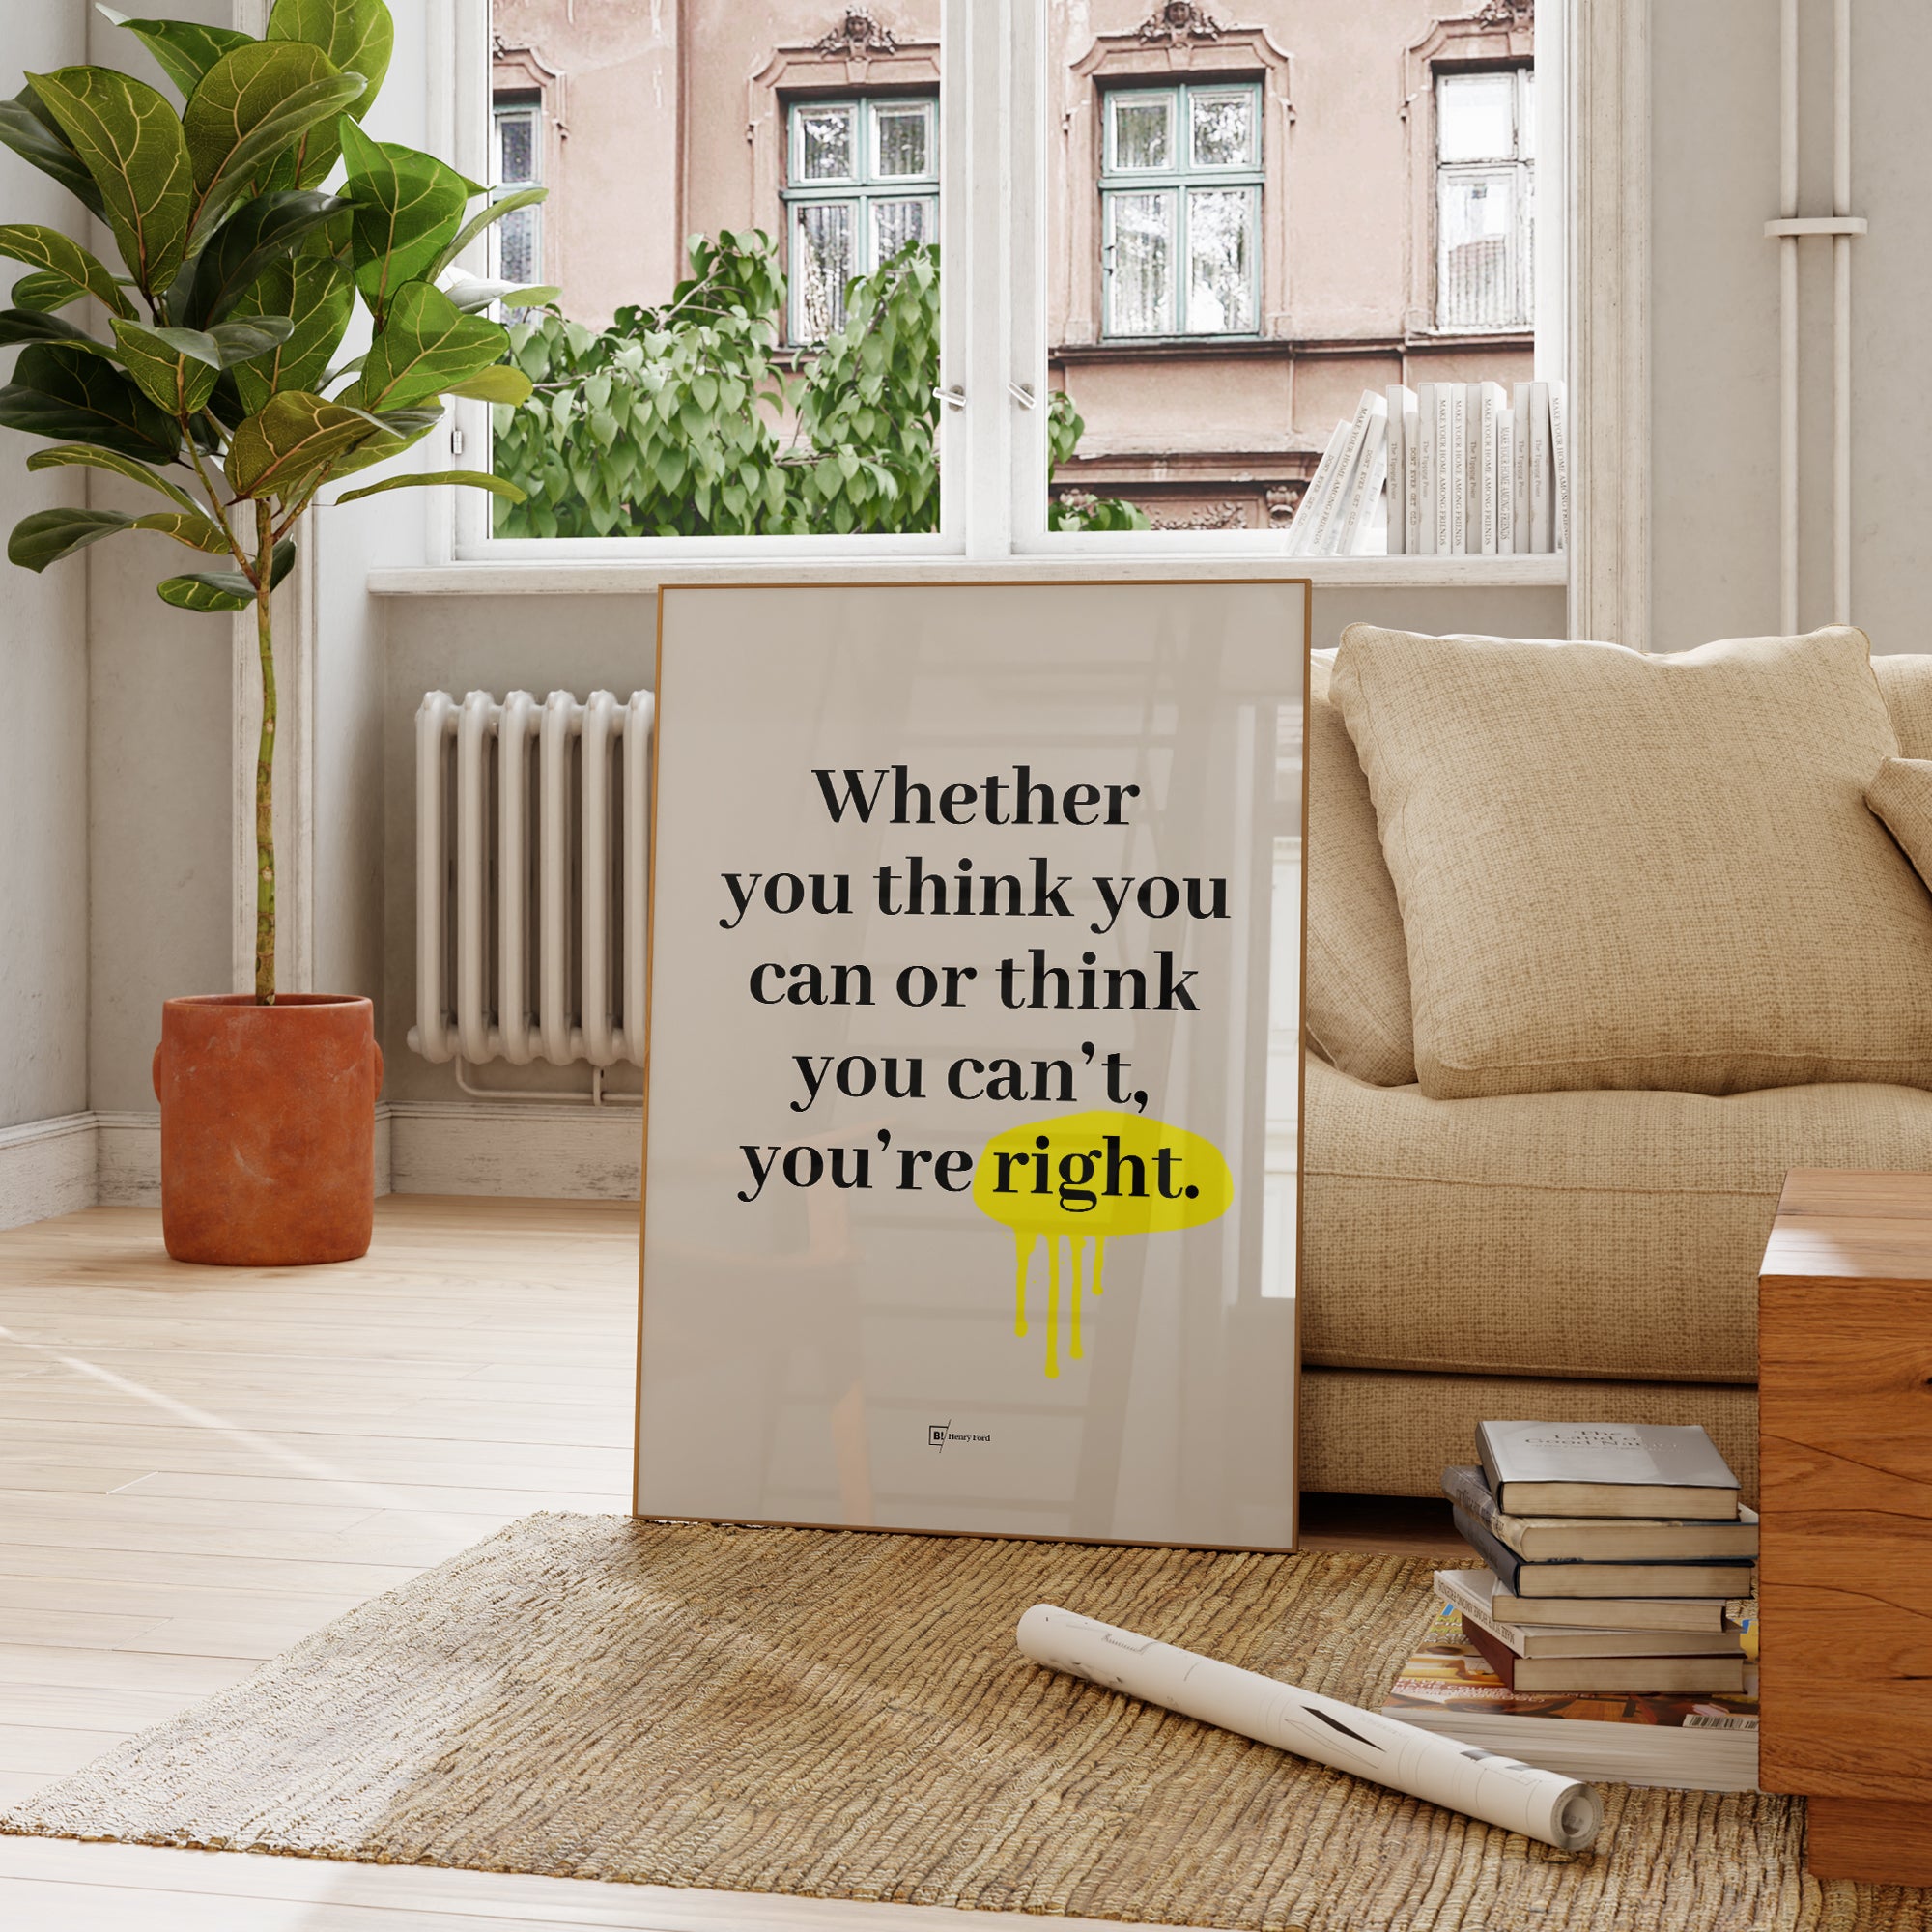 Be inspired by Henry Ford's famous "Whether you think you can or think you can't, you're right" quote art print. This artwork was printed using the giclée process on archival acid-free paper and is presented in a french living room that captures its timeless beauty in every detail.